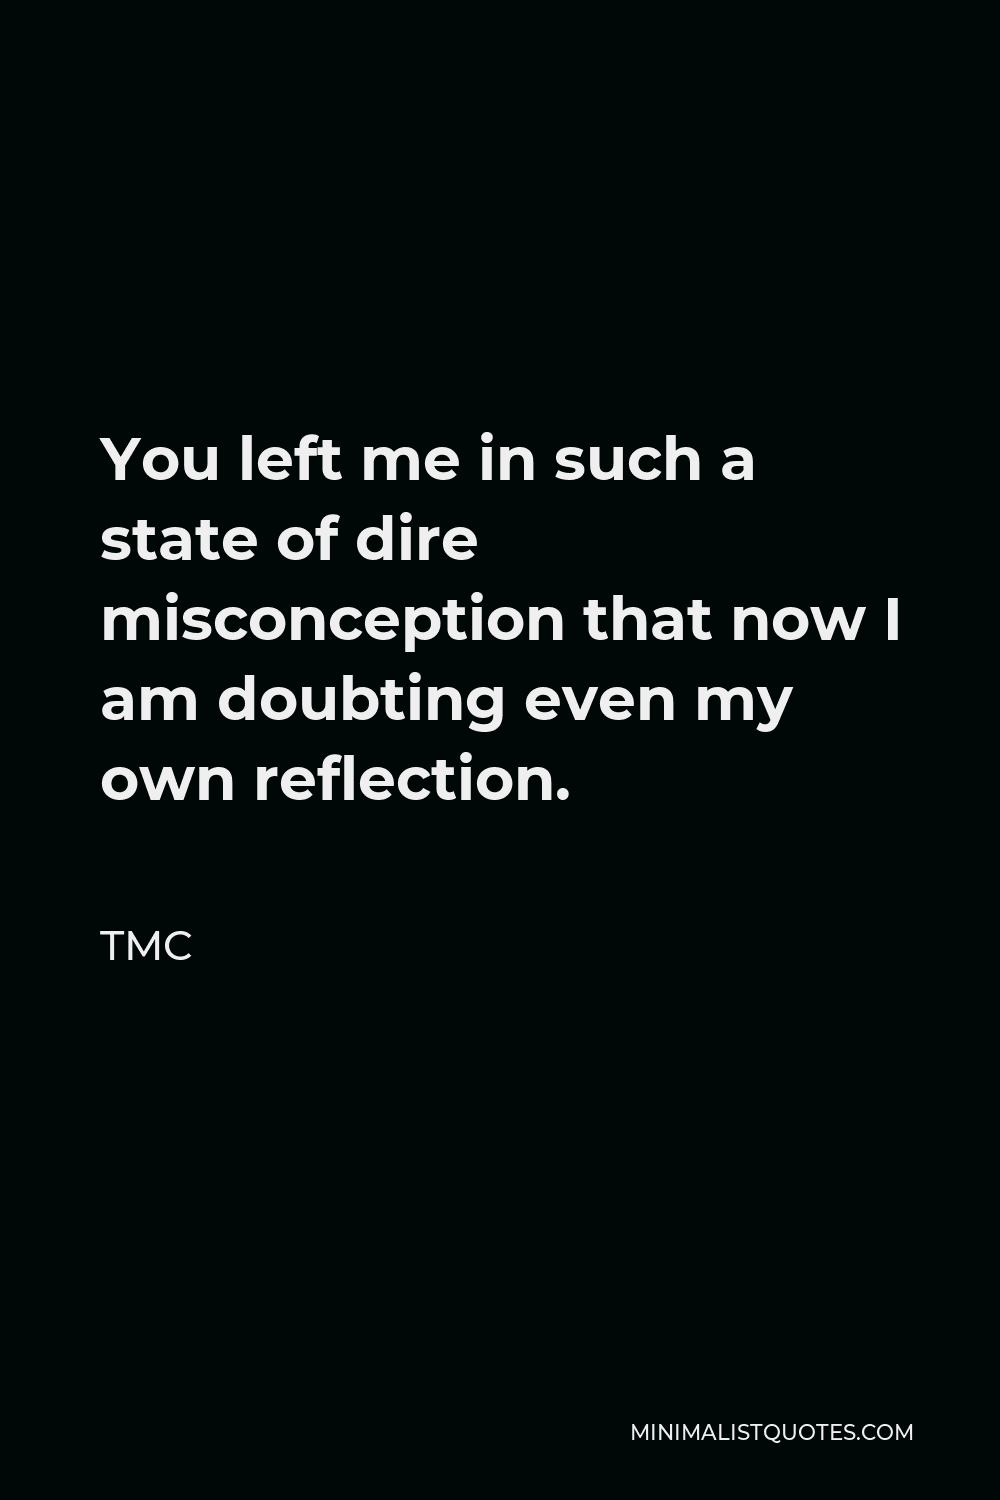 TMC Quote - You left me in such a state of dire misconception that now I am doubting even my own reflection.